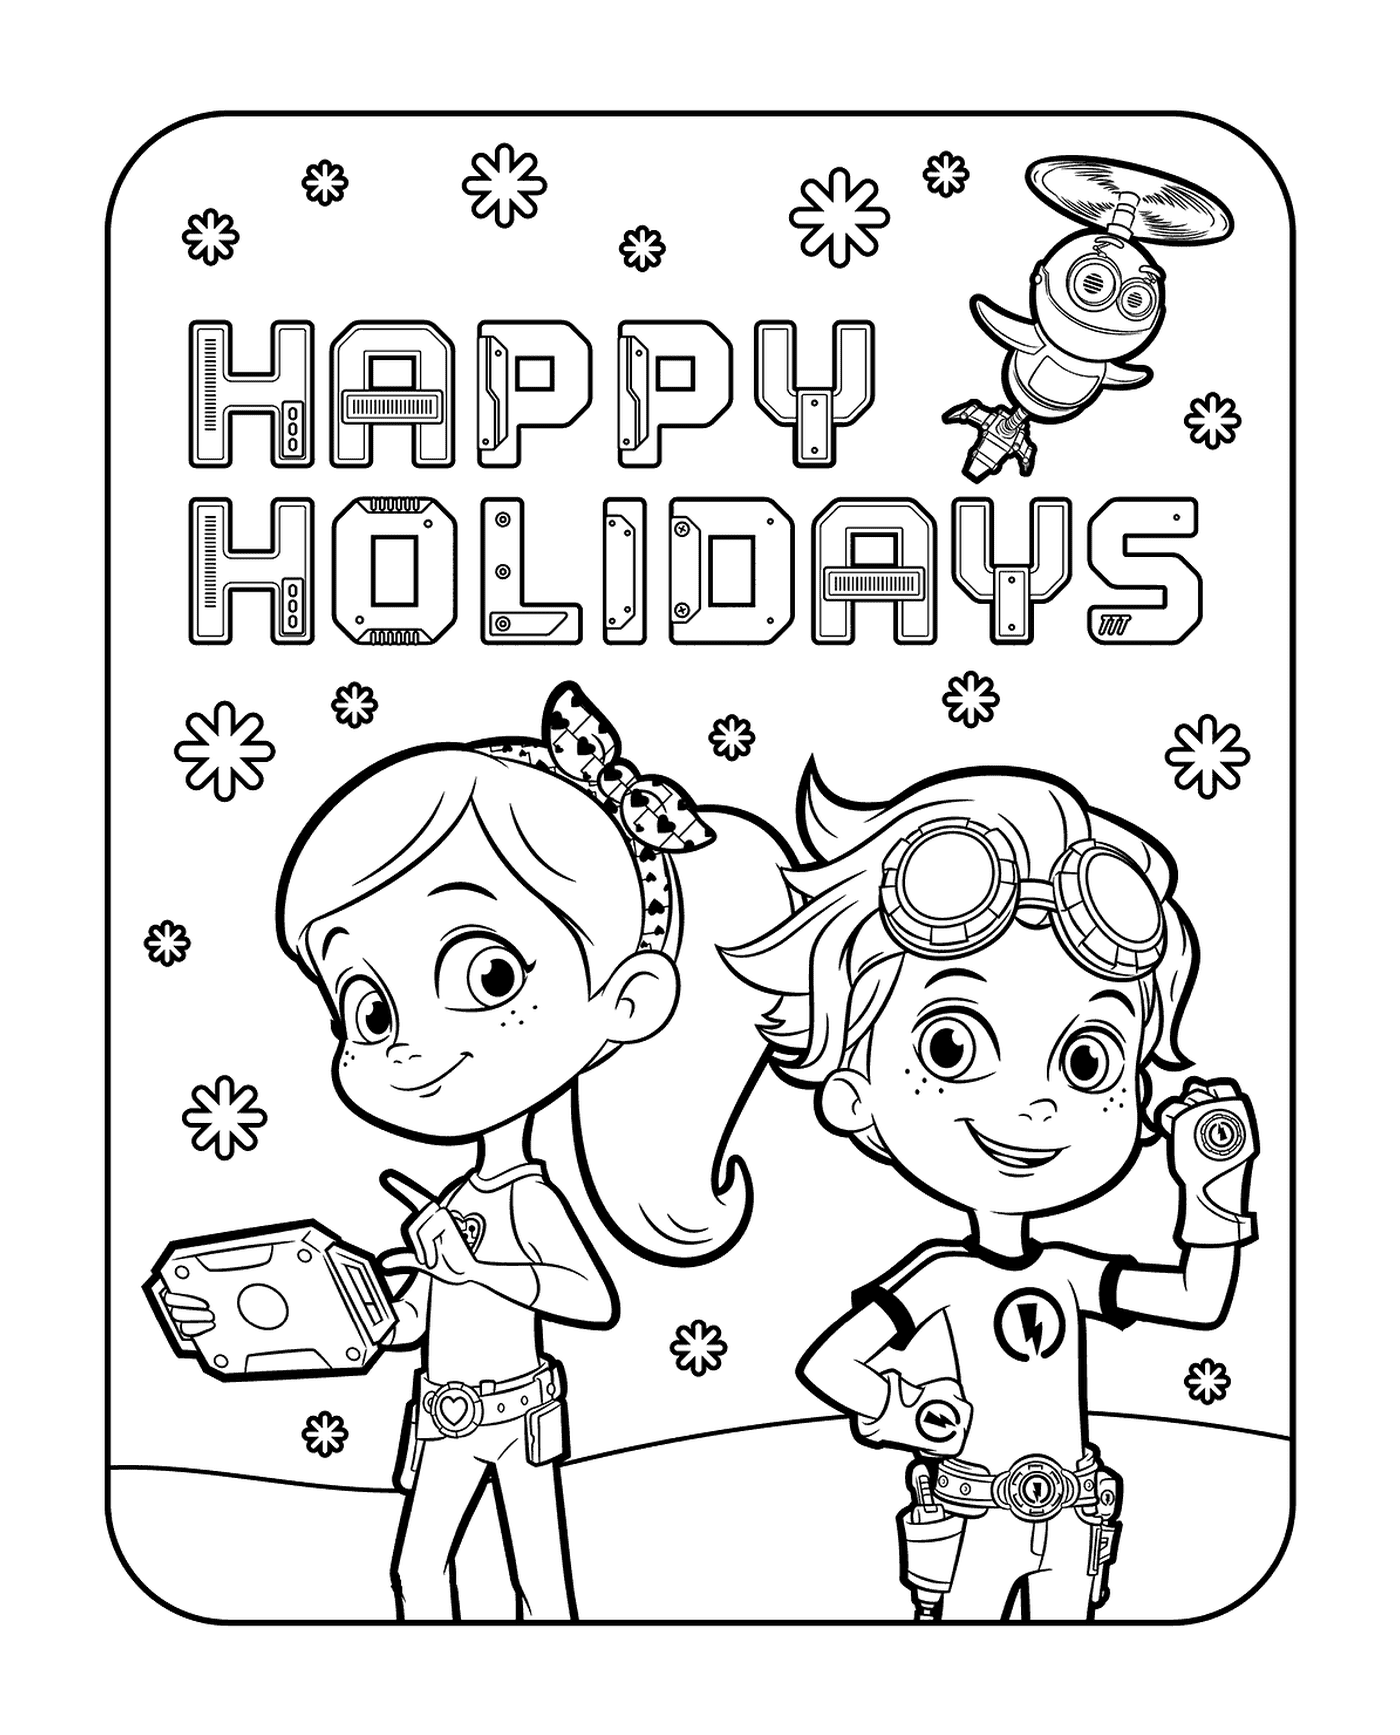 Happy Holidays with Rusty Rivets